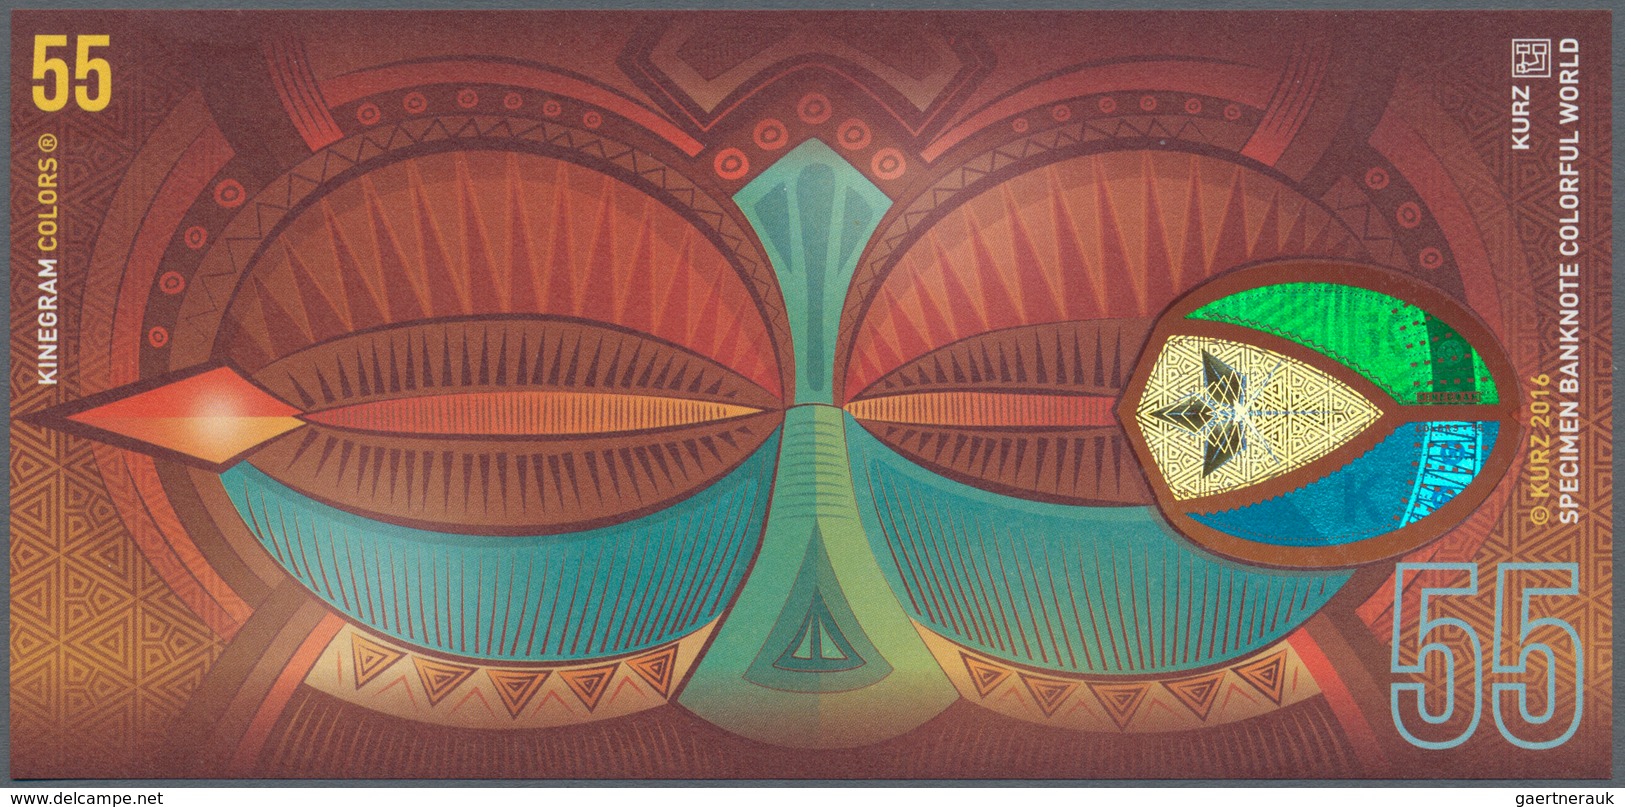 Testbanknoten: Test Note Leonhard Kurz, African Style Design With "Kinegram Colors" In Oval Form At - Specimen